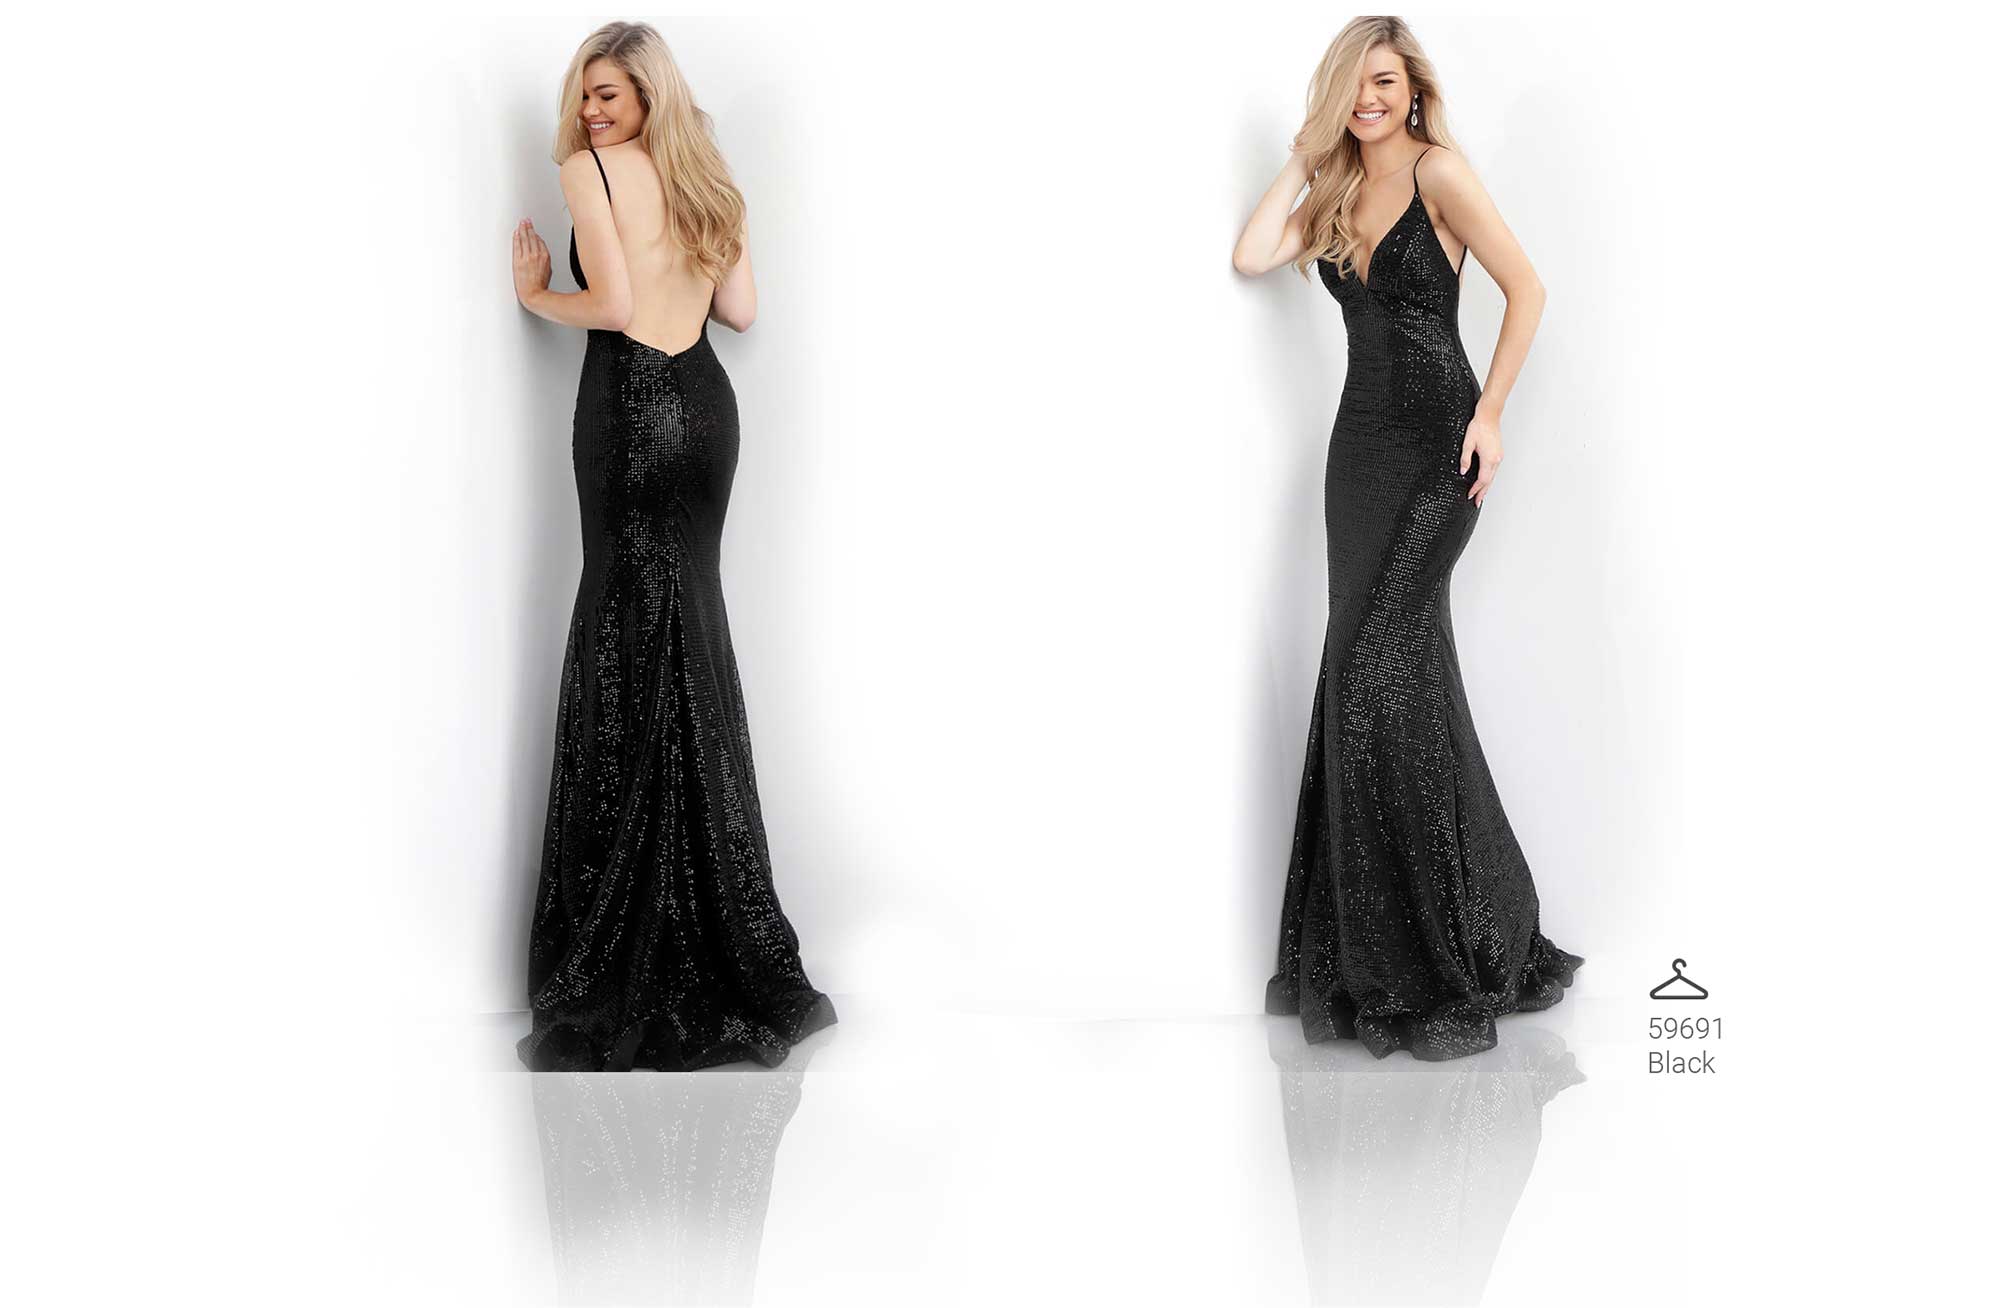 jovani gown prices